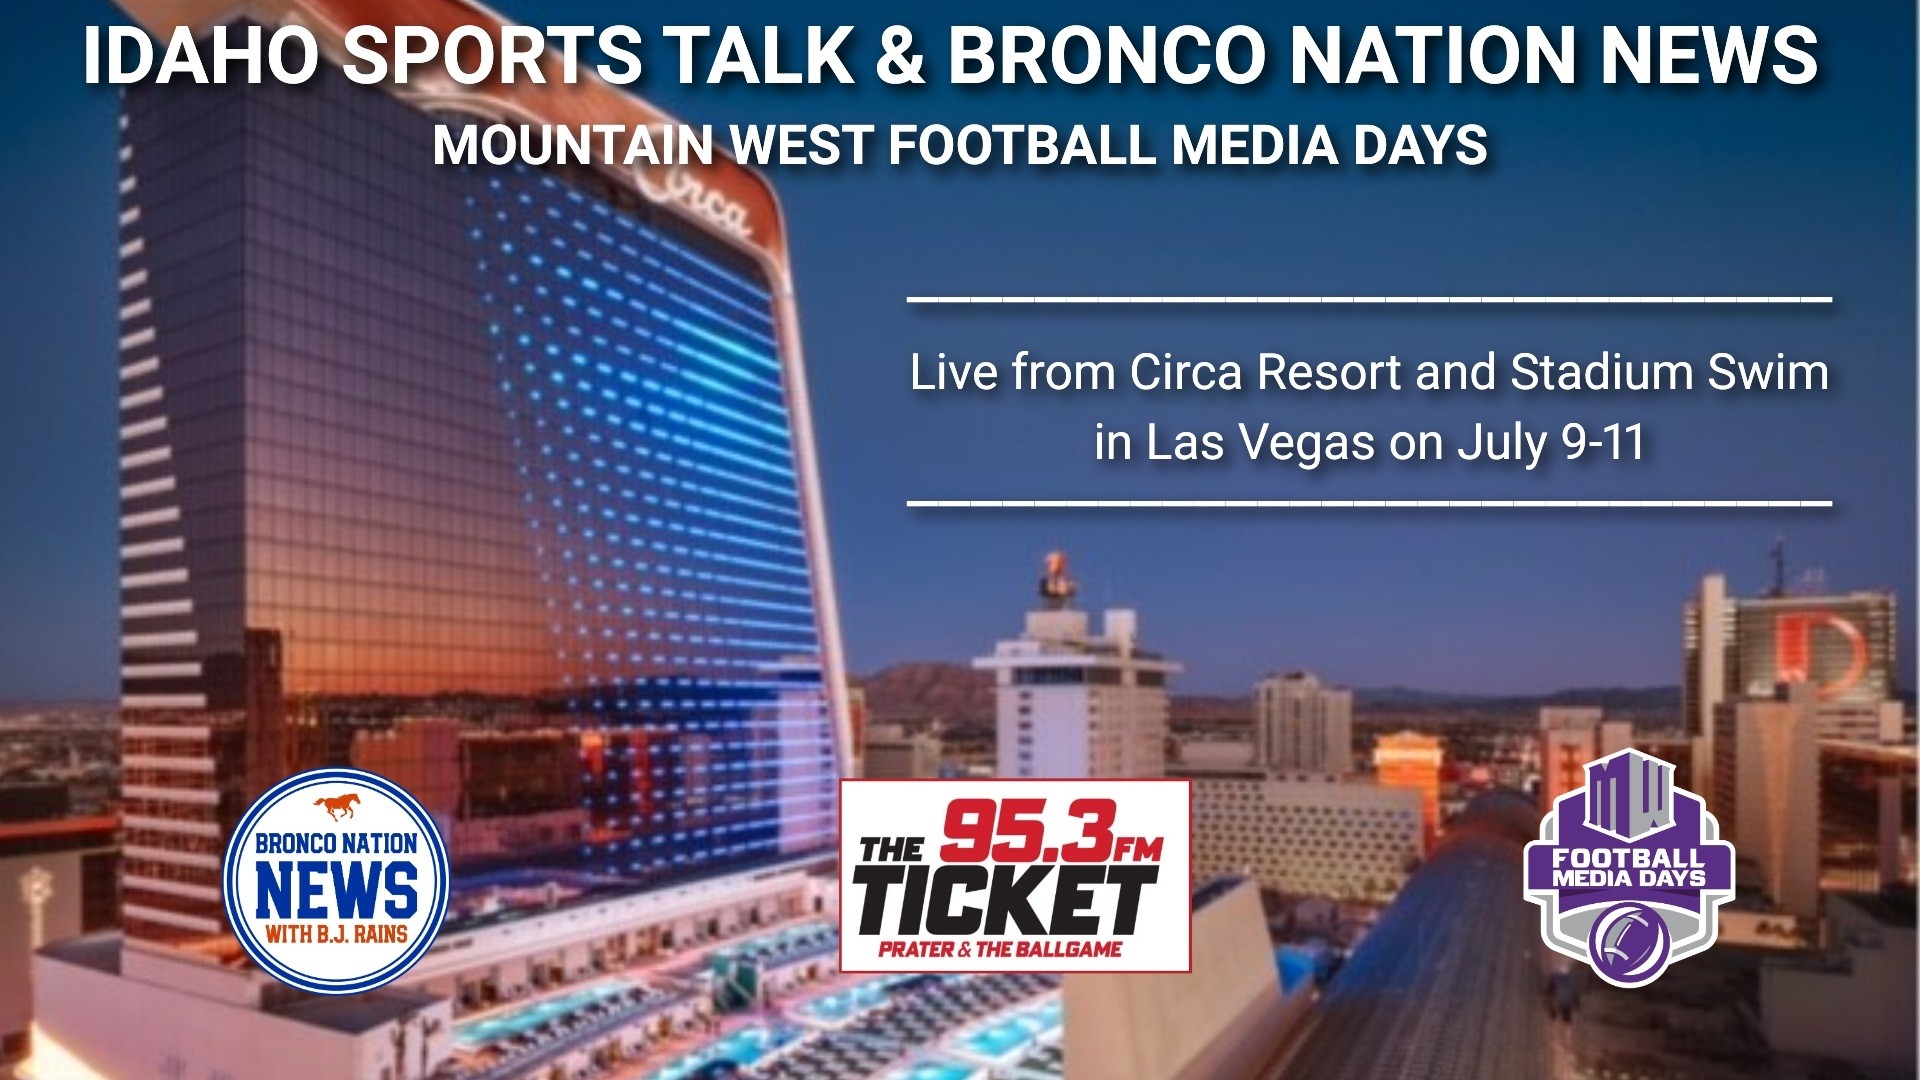 IST WITH PRATER & THE BALLGAME: Live from Mountain West Media Days at Circa Resort in Las Vegas, with broadcast partner Bronco Nation News, exclusive interviews with Boise State running back Ashton Jeanty (his legacy), coach Spencer Danielson (no more Sunday practices), athletic director Jeramiah Dickey (on the Houston job), Nevada coach Jeff Choate (fired up and looking forward to the BSU game in November) and UNLV coach Barry Odom (giving IST credit for last year’s success), plus Media Day segments with Bob (Bronco Focus) and B.J. (BNN Report)